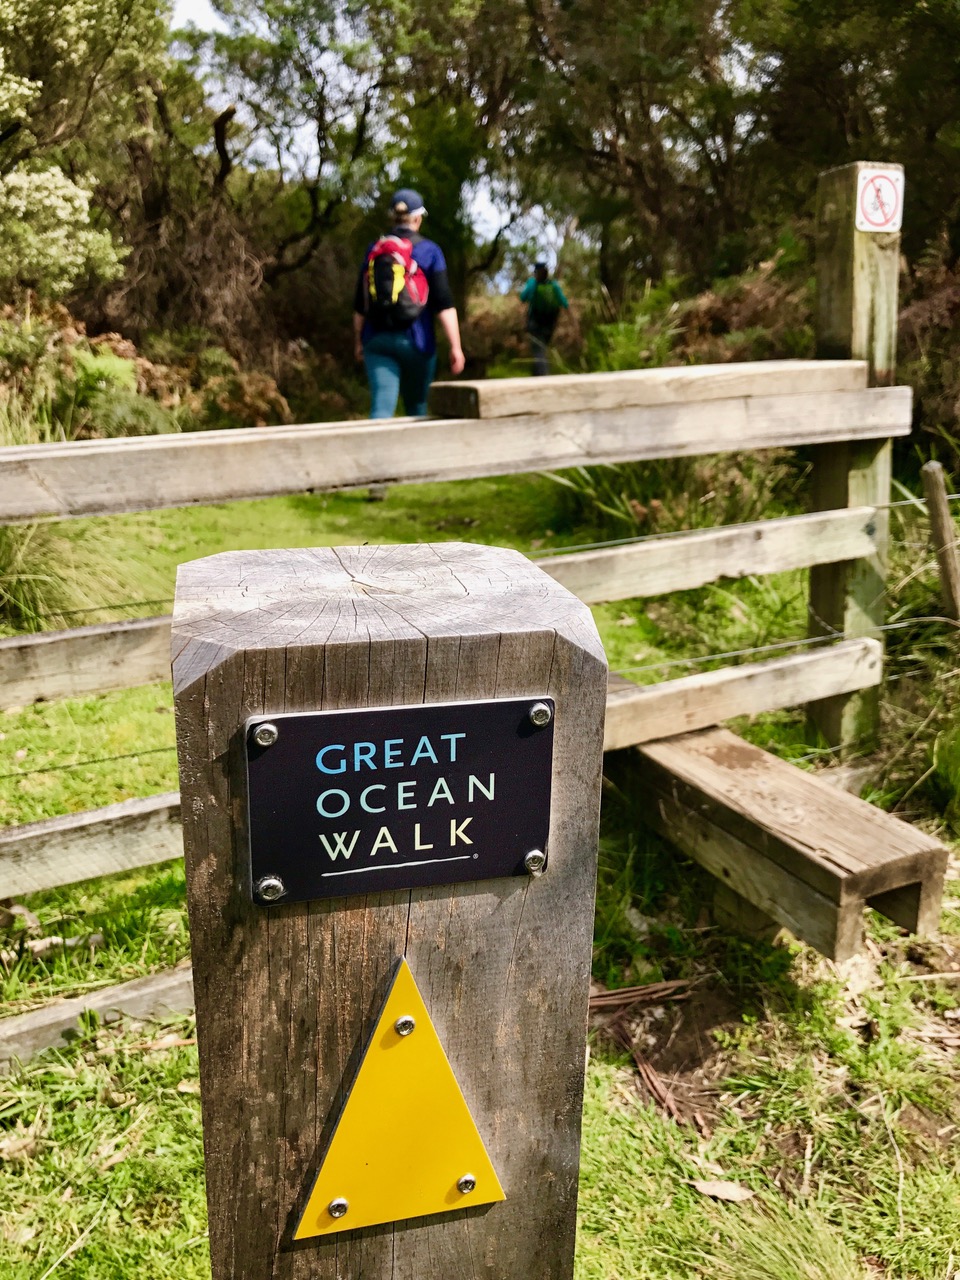 The group of walkers will tackle the stunning Great Ocean Walk.